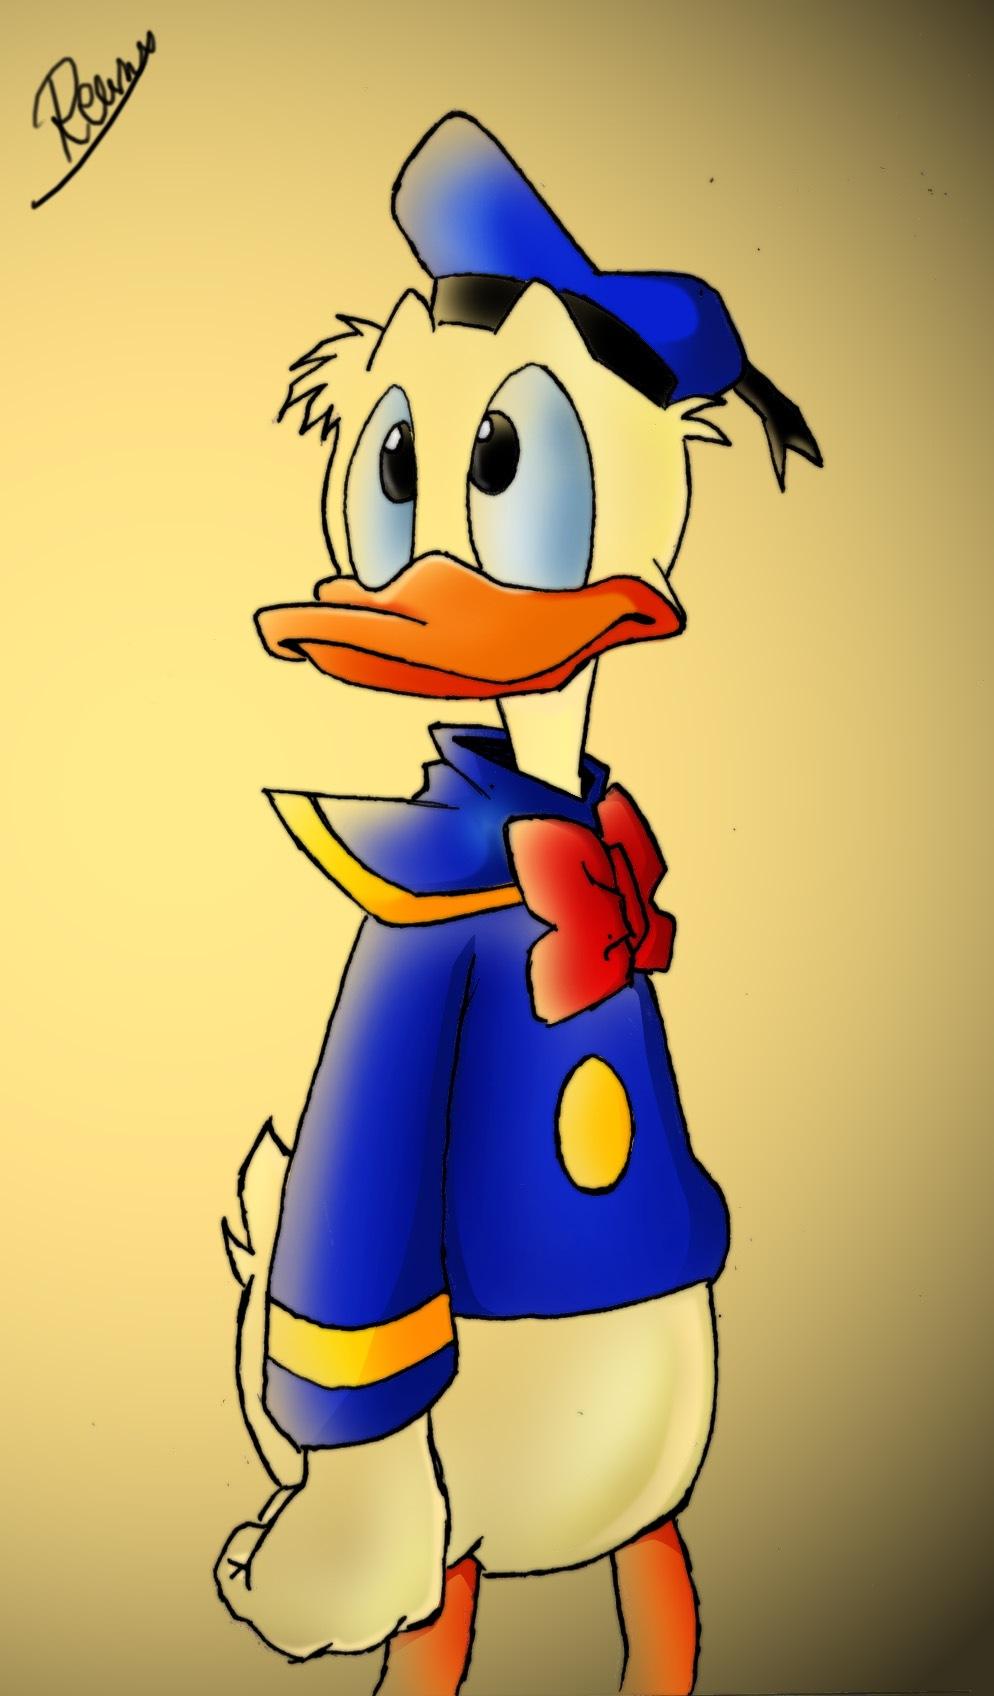 A cartoon duck wearing blue and yellow clothing - Duck